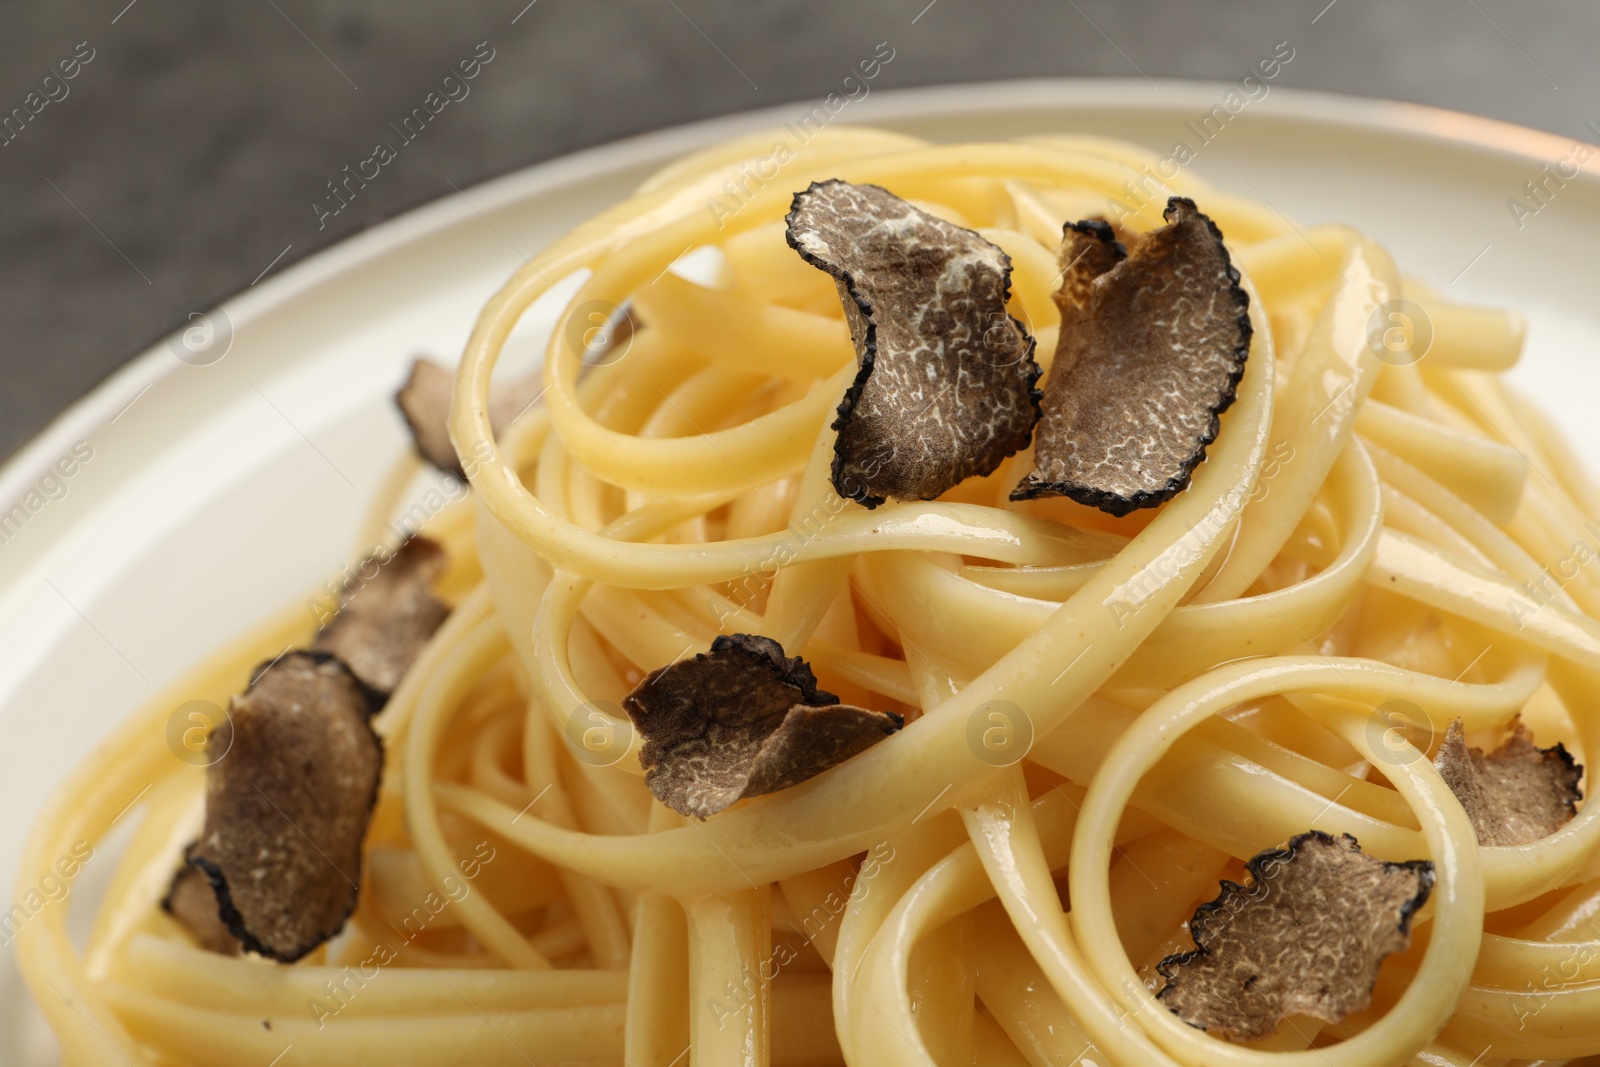 Photo of Tasty fettuccine with truffle on plate, closeup